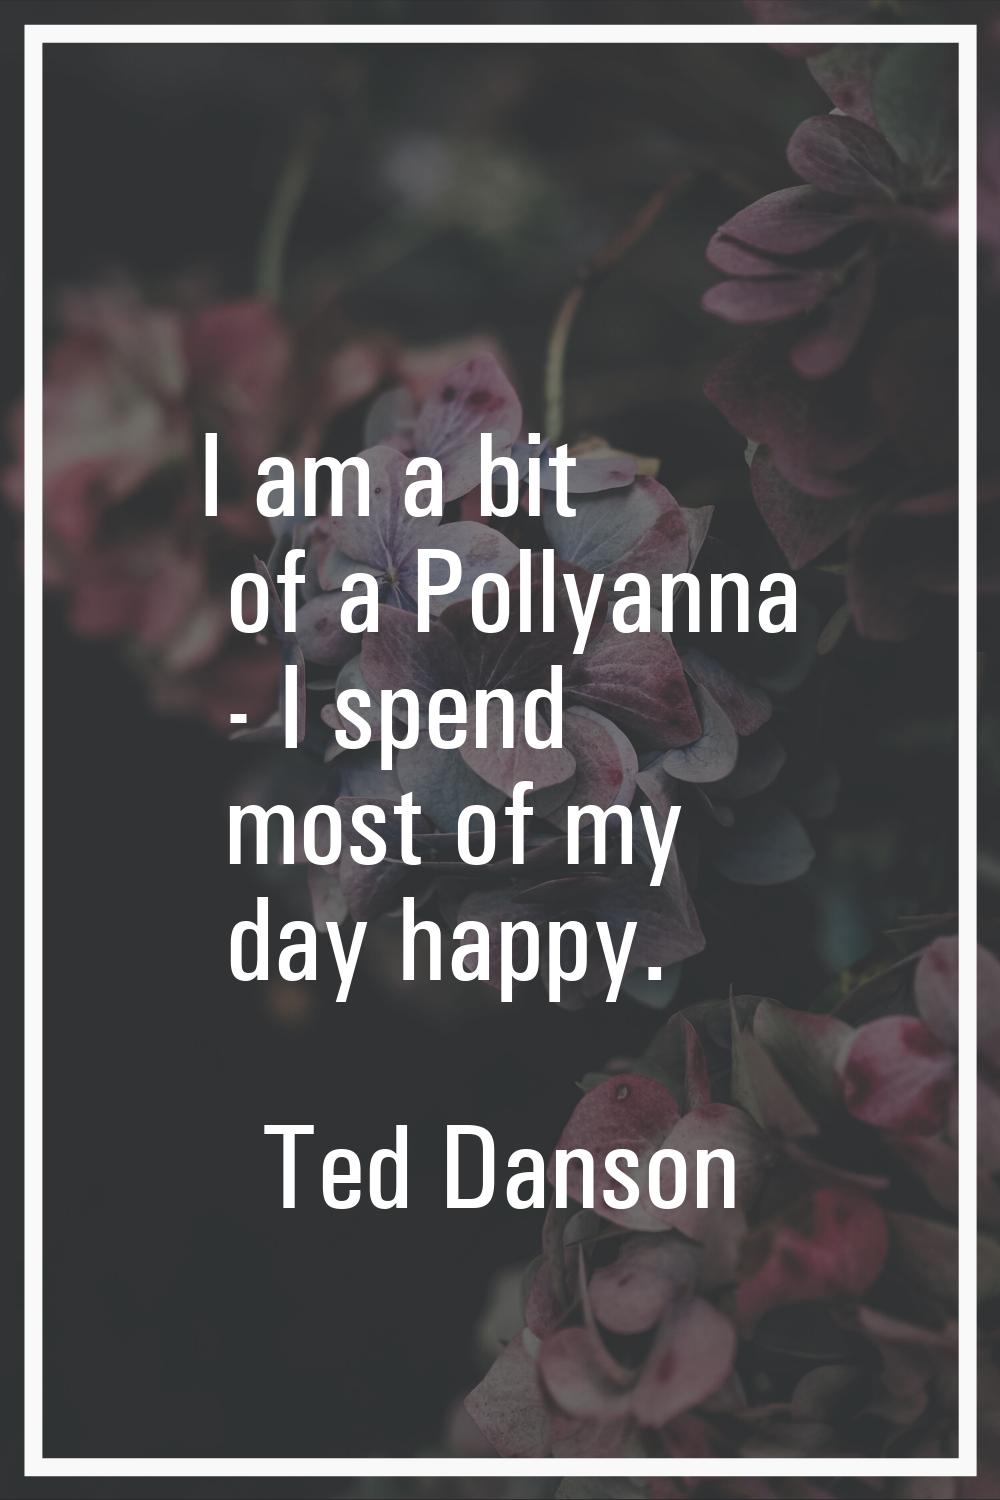 I am a bit of a Pollyanna - I spend most of my day happy.